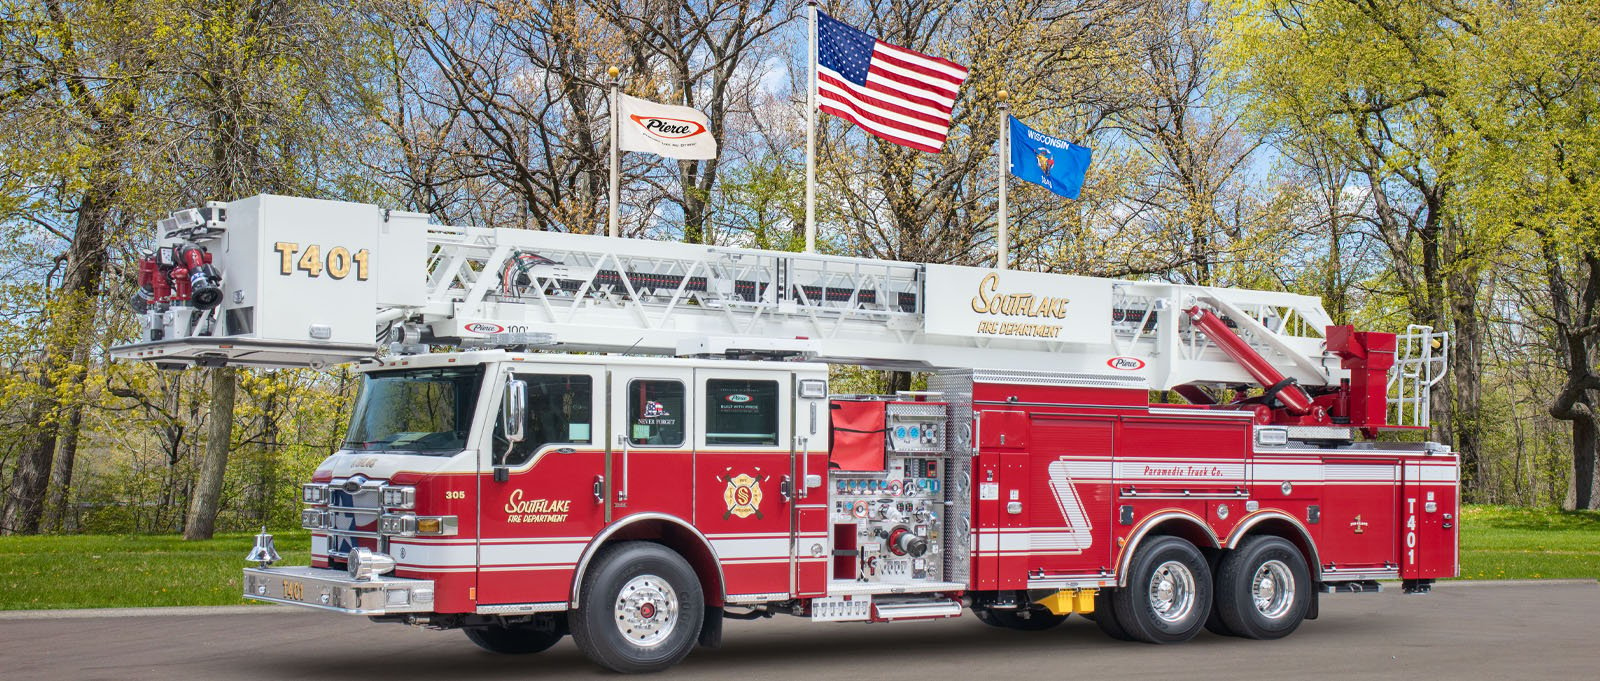 The Southlake Department of Public Safety aerial fire truck is pictured parked in front of three flags and green trees at Pierce Manufacturing. 